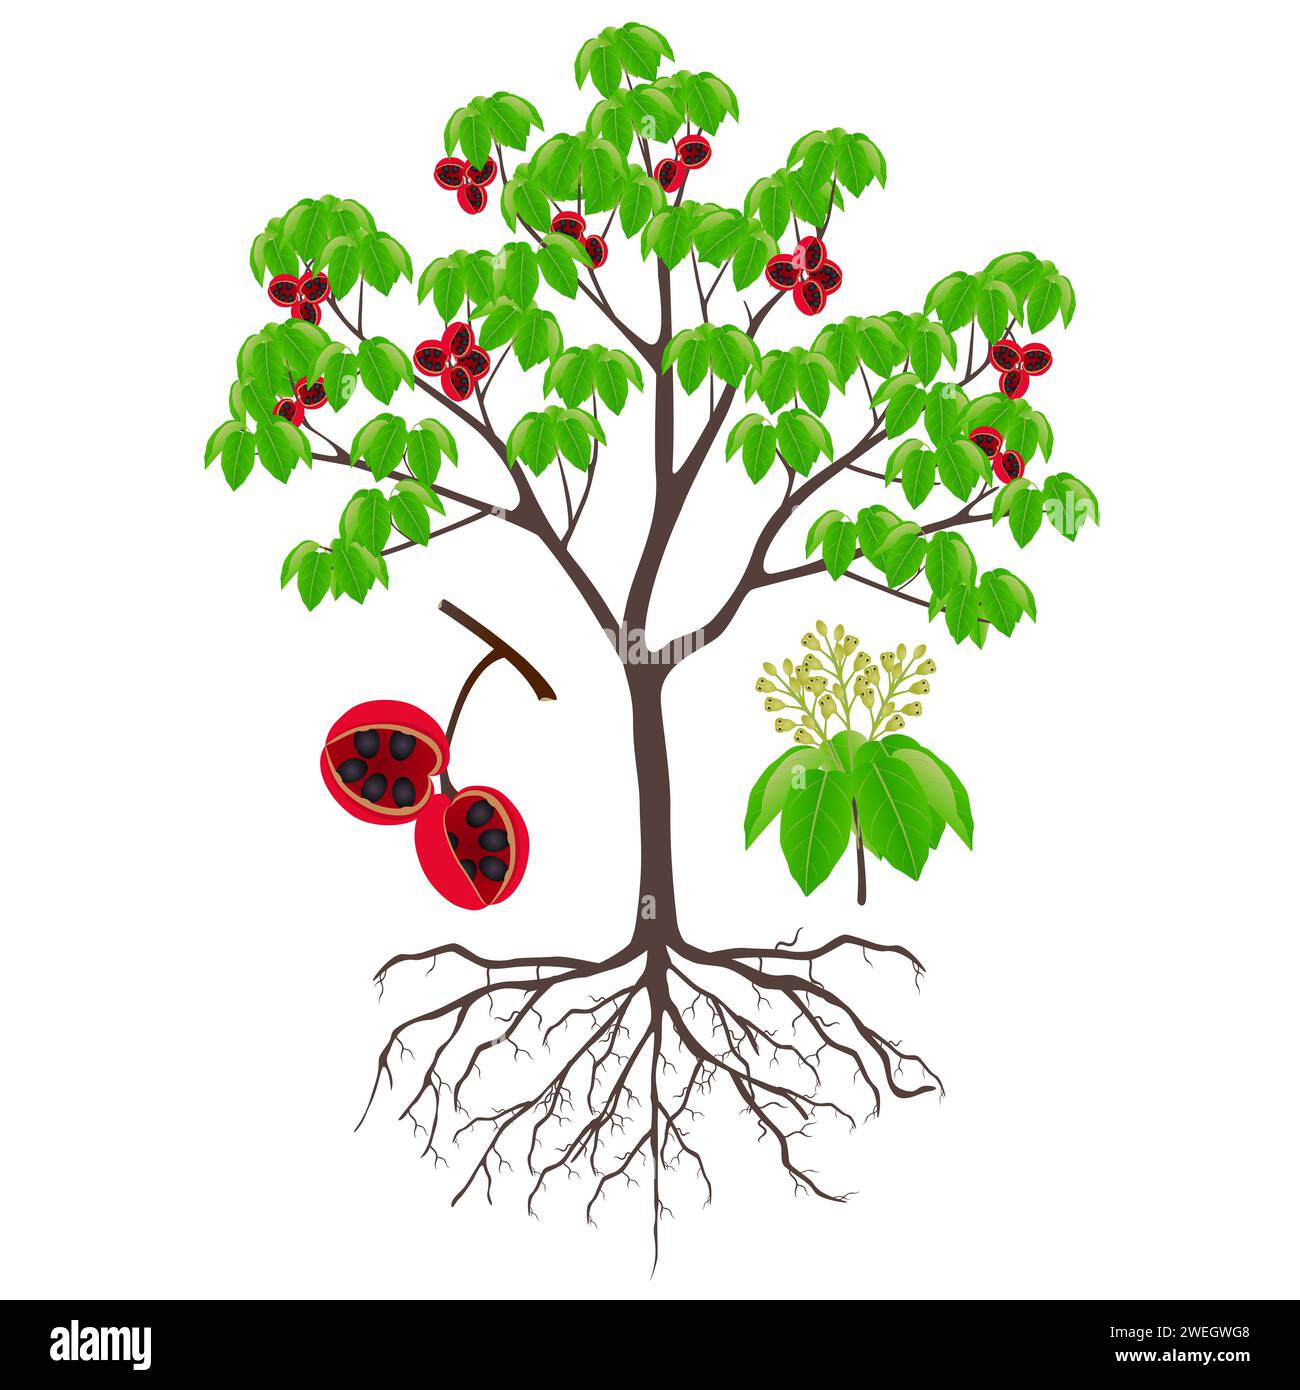 Sterculia quadrifida tree with fruits and inflorescences on a white background. Stock Vector